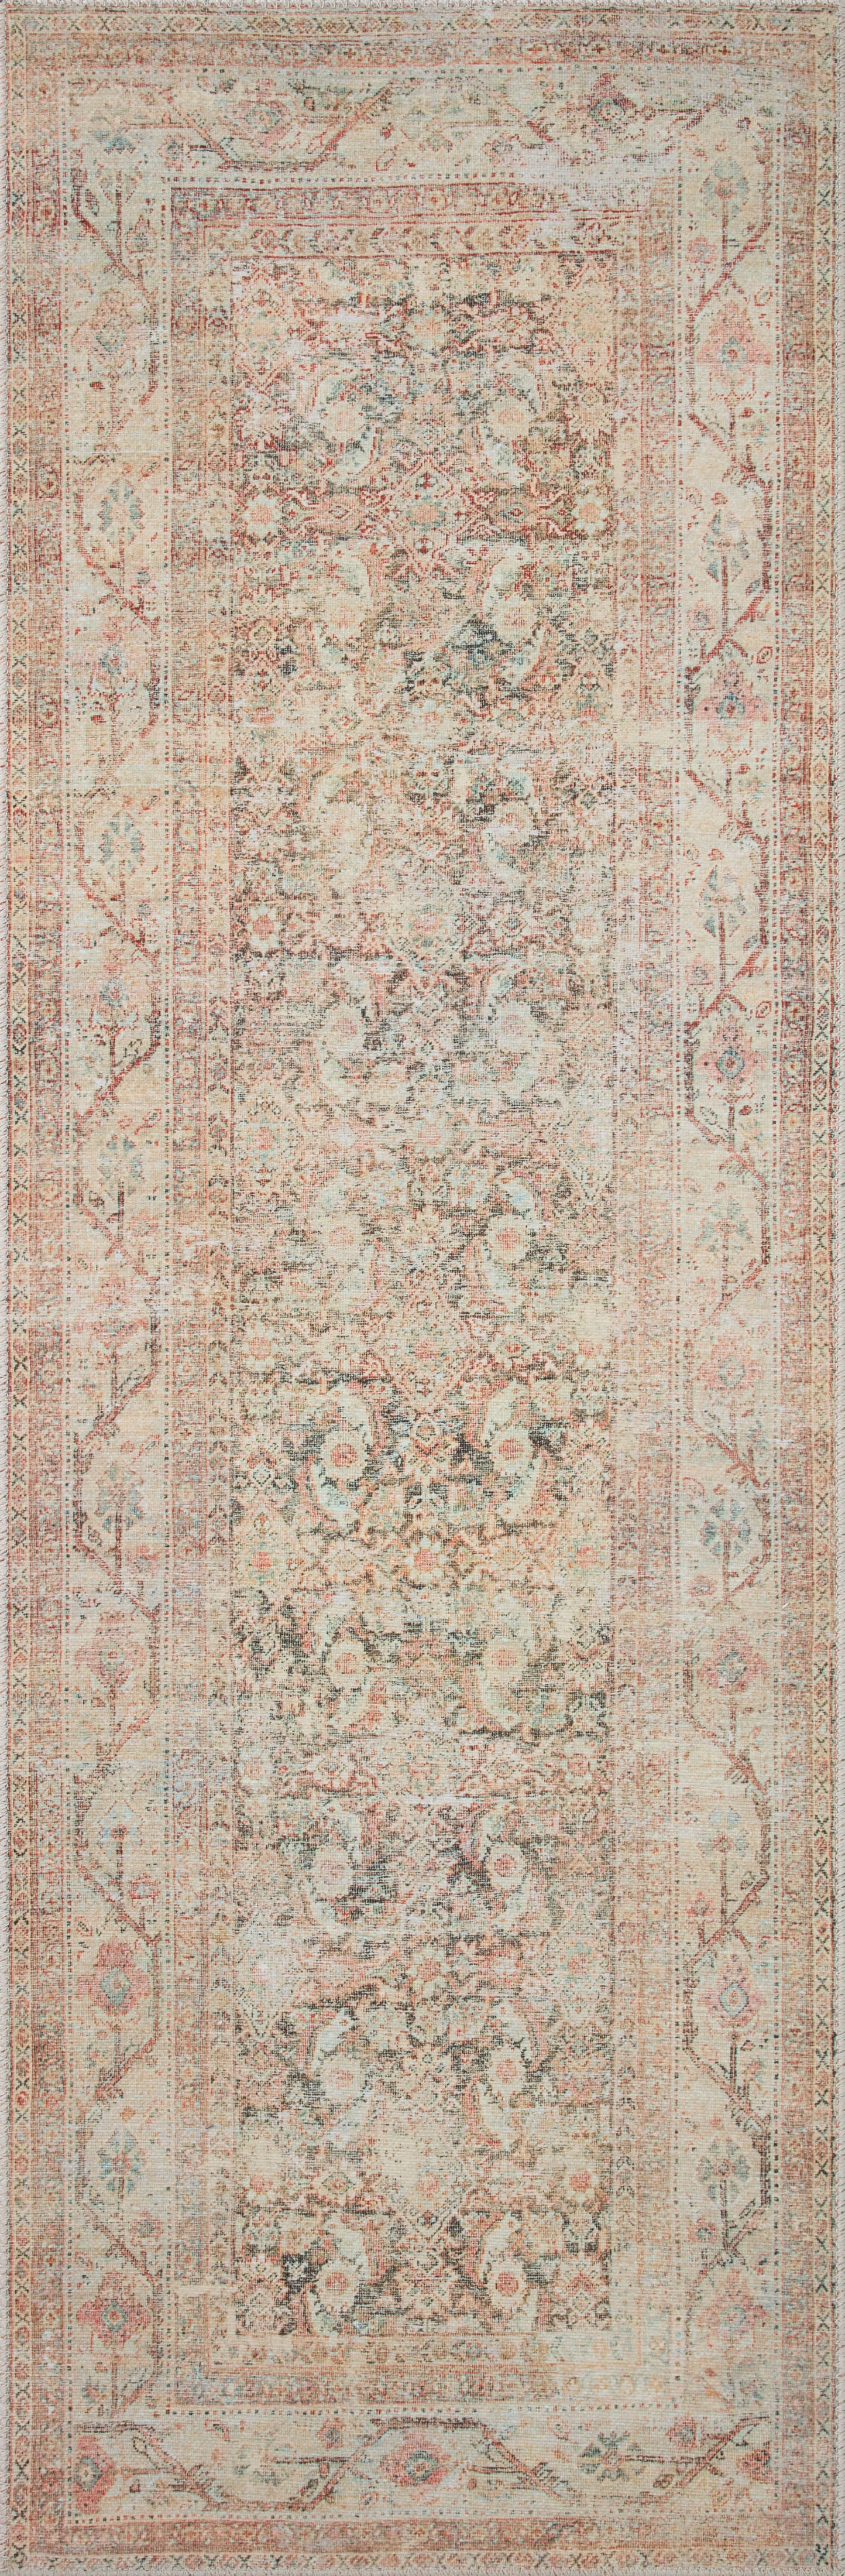 Tapis ADR-01 Adrian Natural / Abricot